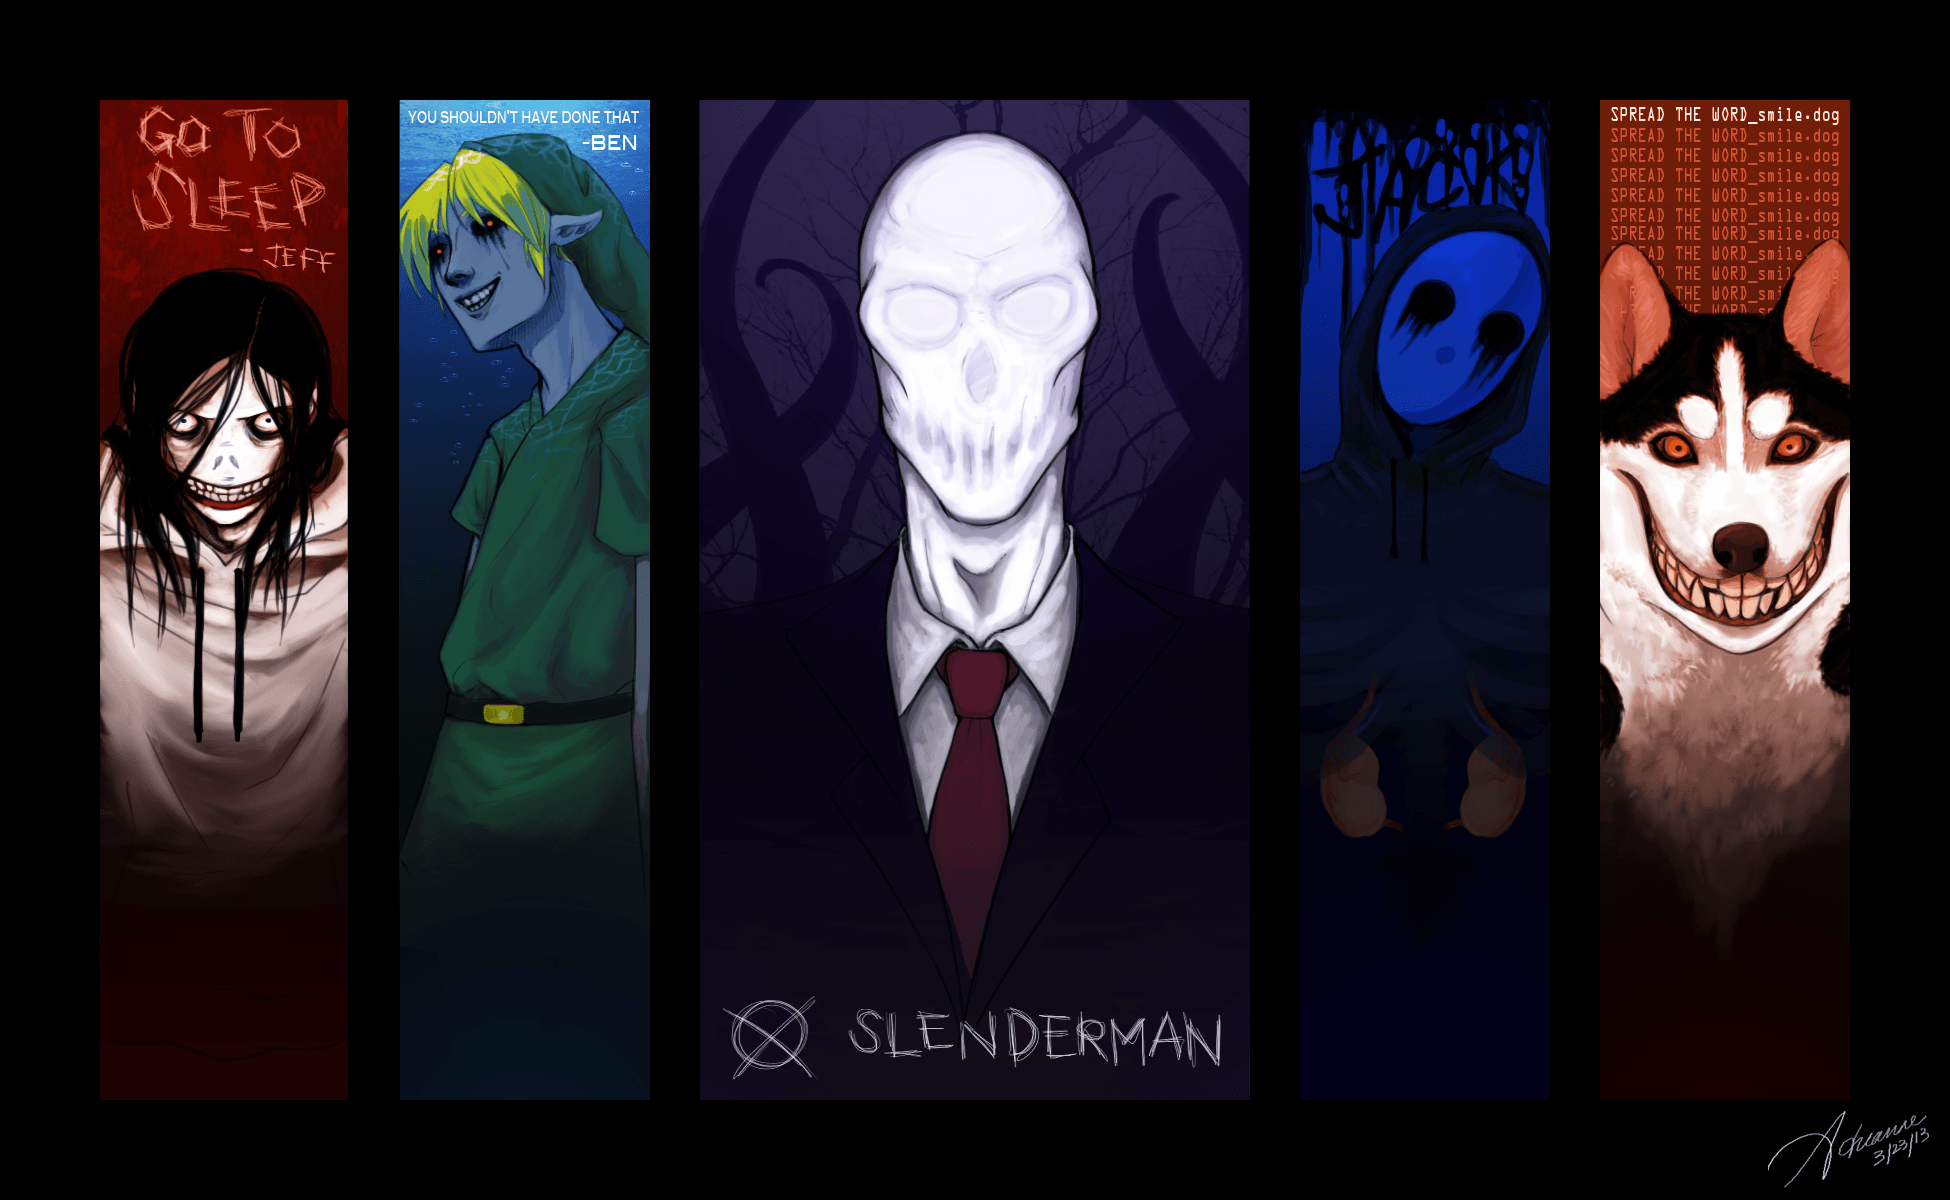 Download Creepypasta Slenderman Wallpaper Hd Backgrounds Download Itl Cat Dark mode, no ads, holiday themed, super heroes, sport teams, tv shows, movies and much more, on userstyles.org. creepypasta slenderman wallpaper